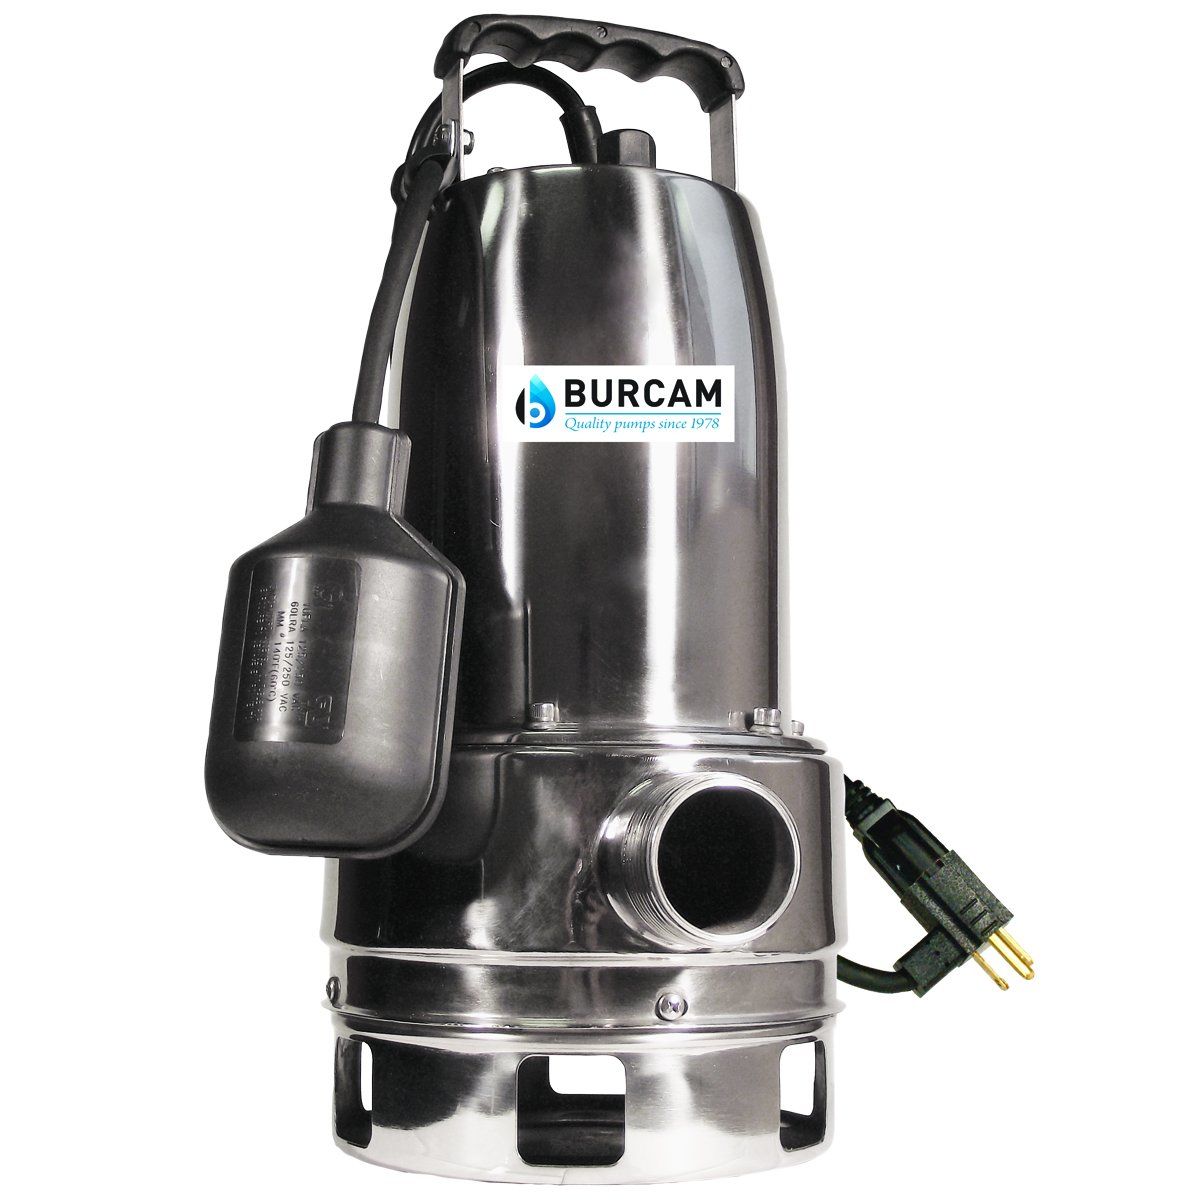 Burcam 300527 - 3/4 Horsepower Stainless Steel Submersible Sump Pump with Mechanical Float Switch